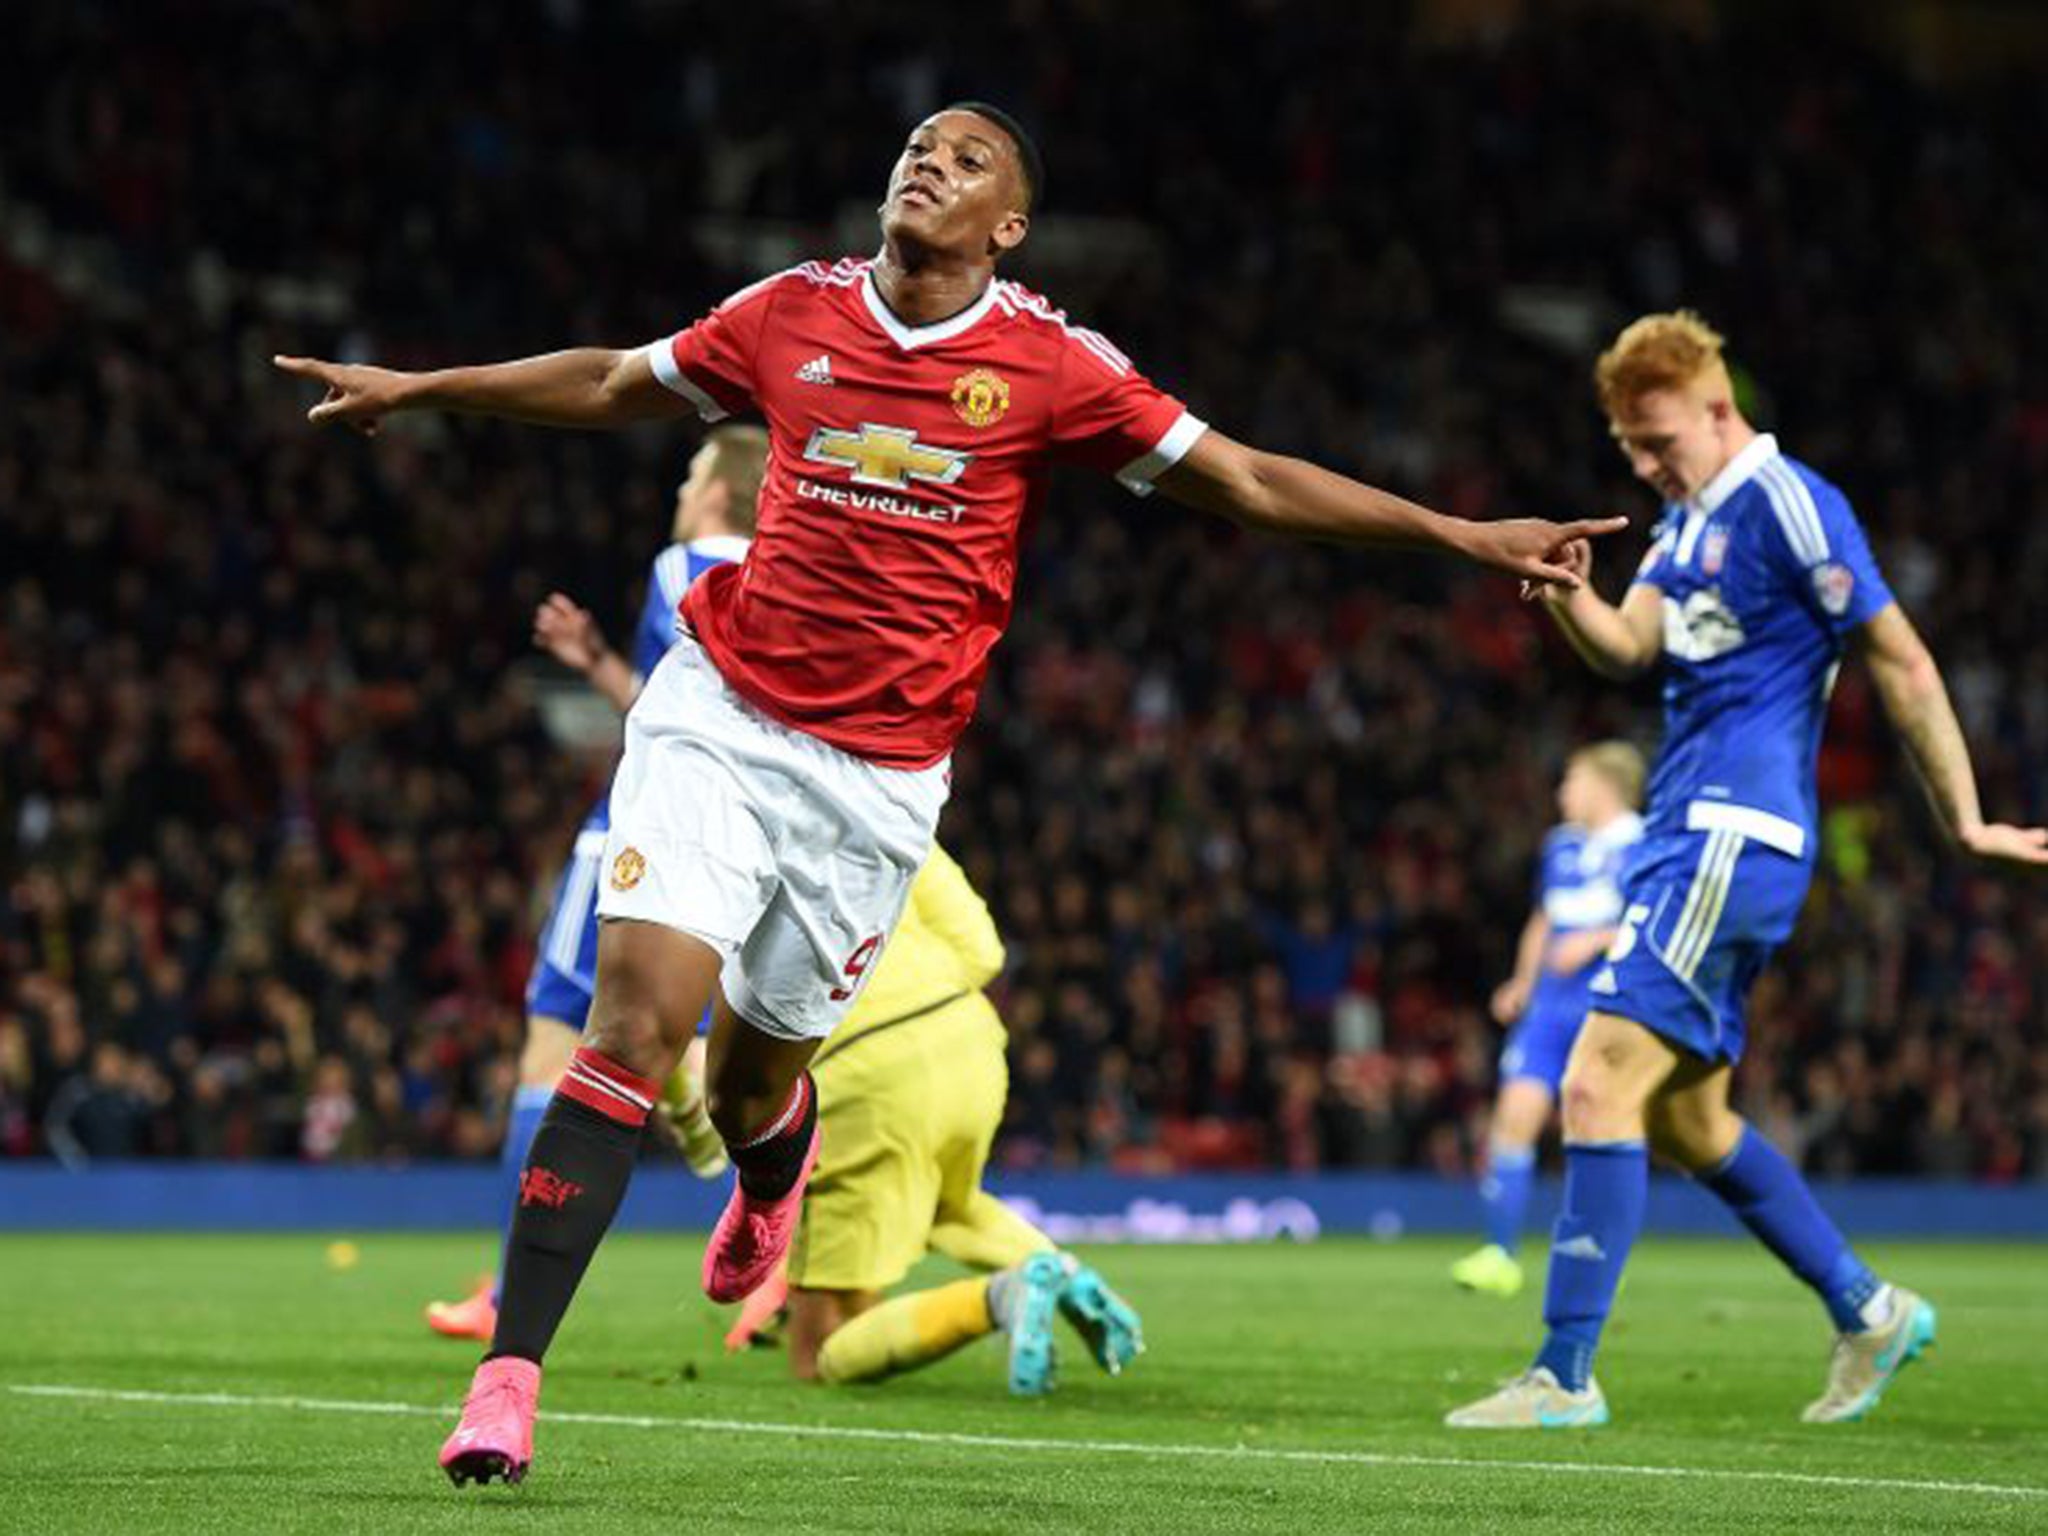 Anthony Martial celebrates his goal against Ipswich